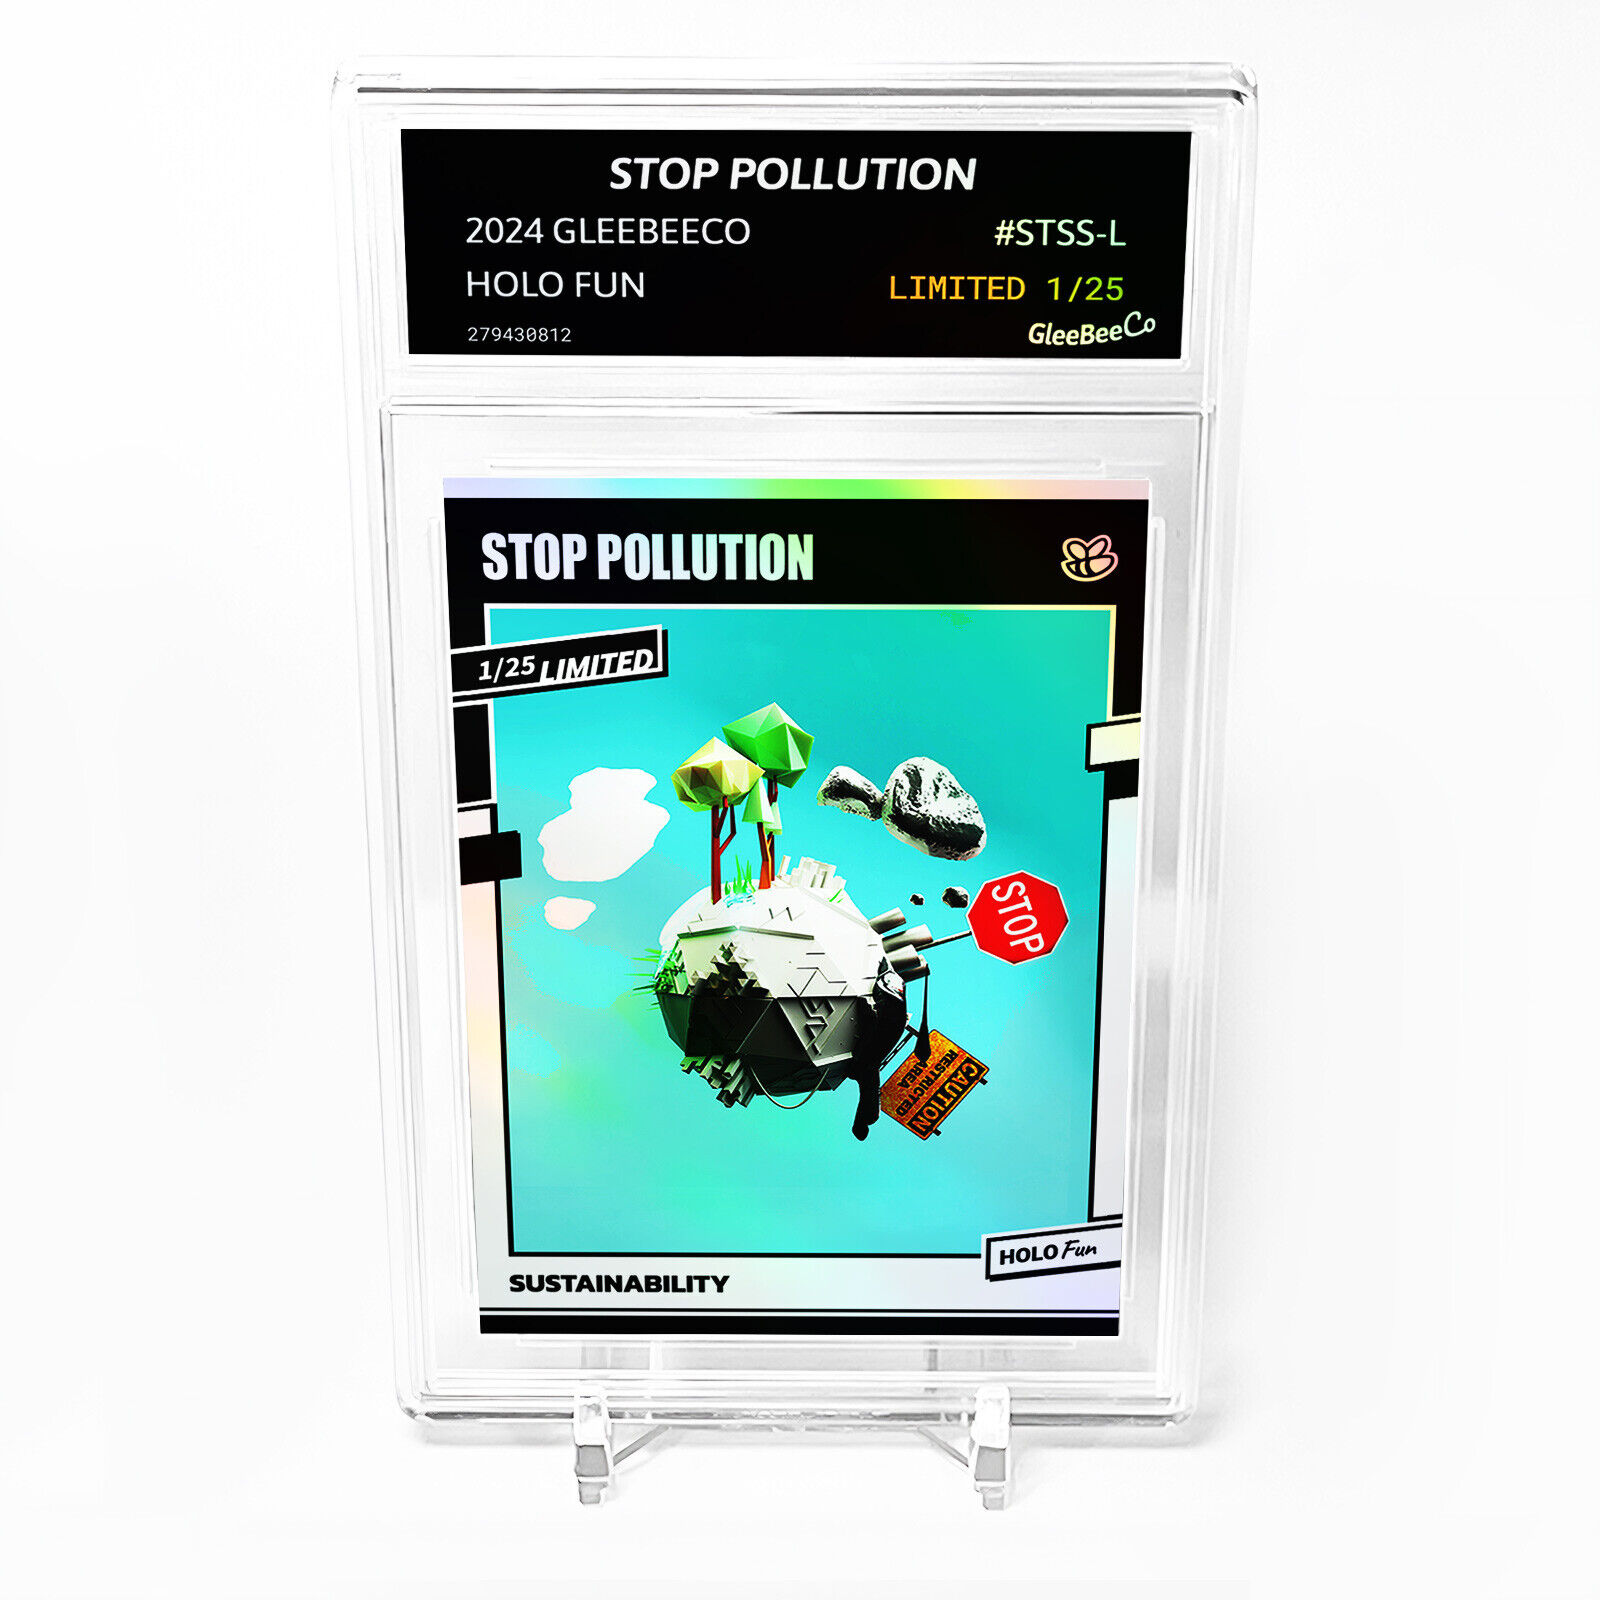 STOP POLLUTION Art Card 2024 GleeBeeCo Holo Fun Slabbed #STSS-L /25